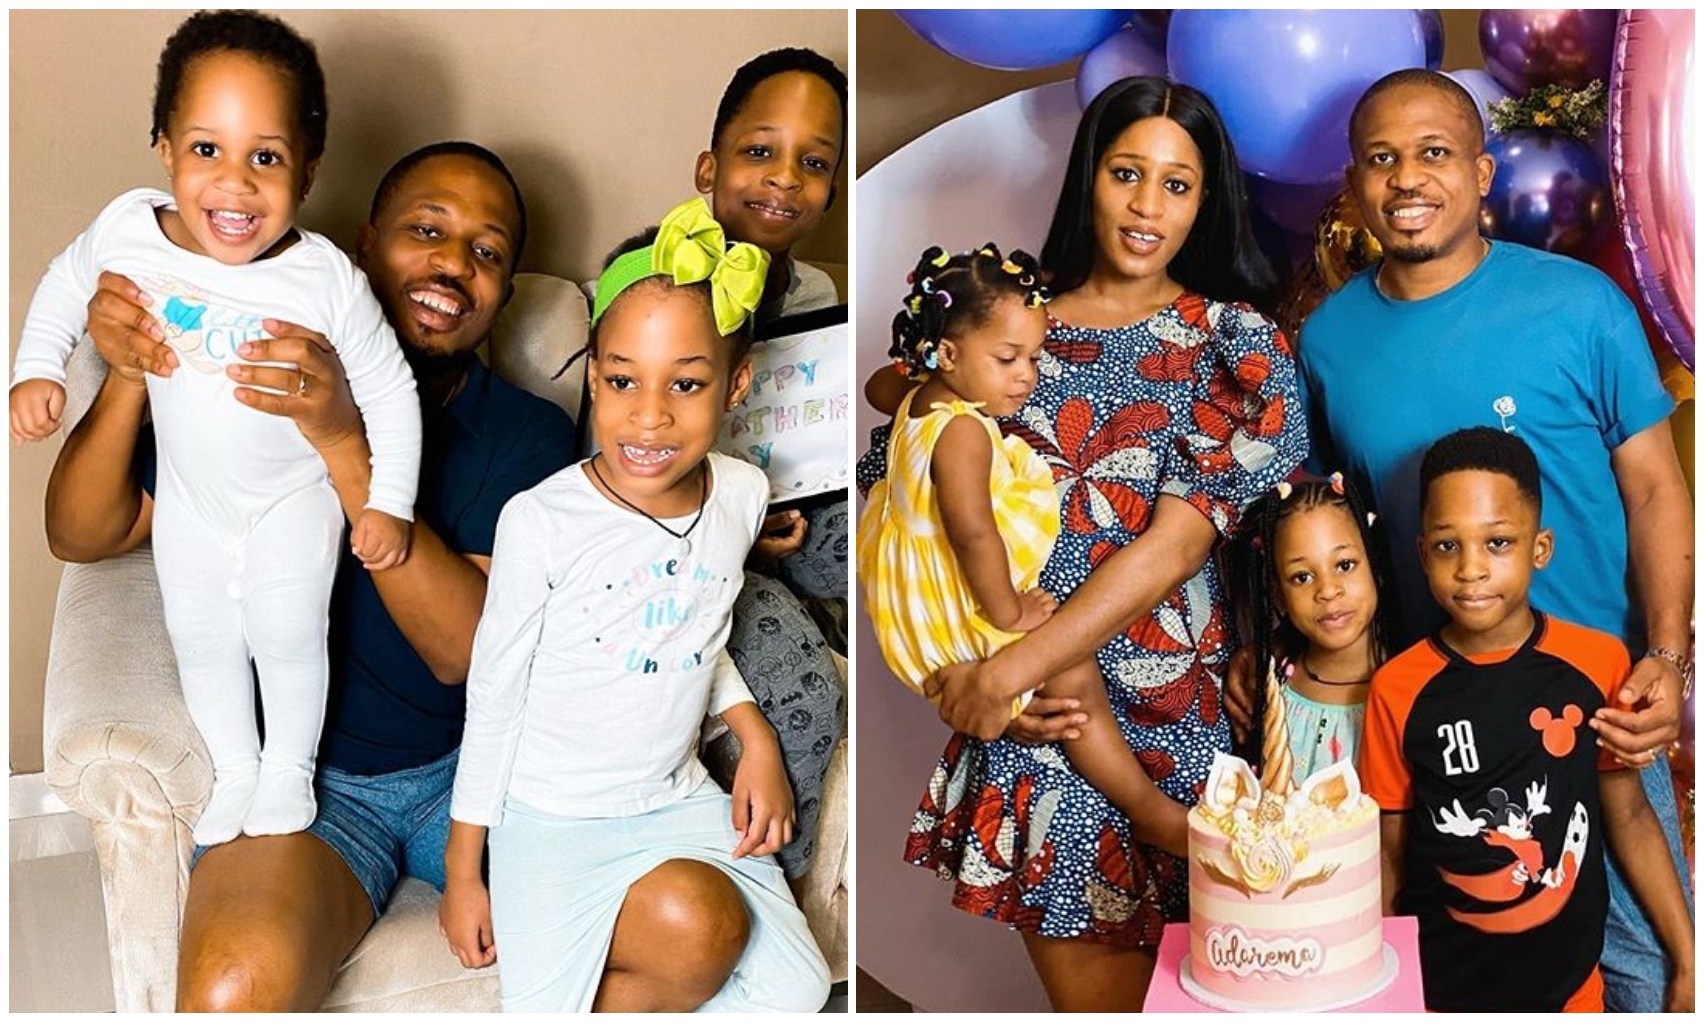 Singer Naeto C and wife celebrate their daughter's 6th birthday (Photos)